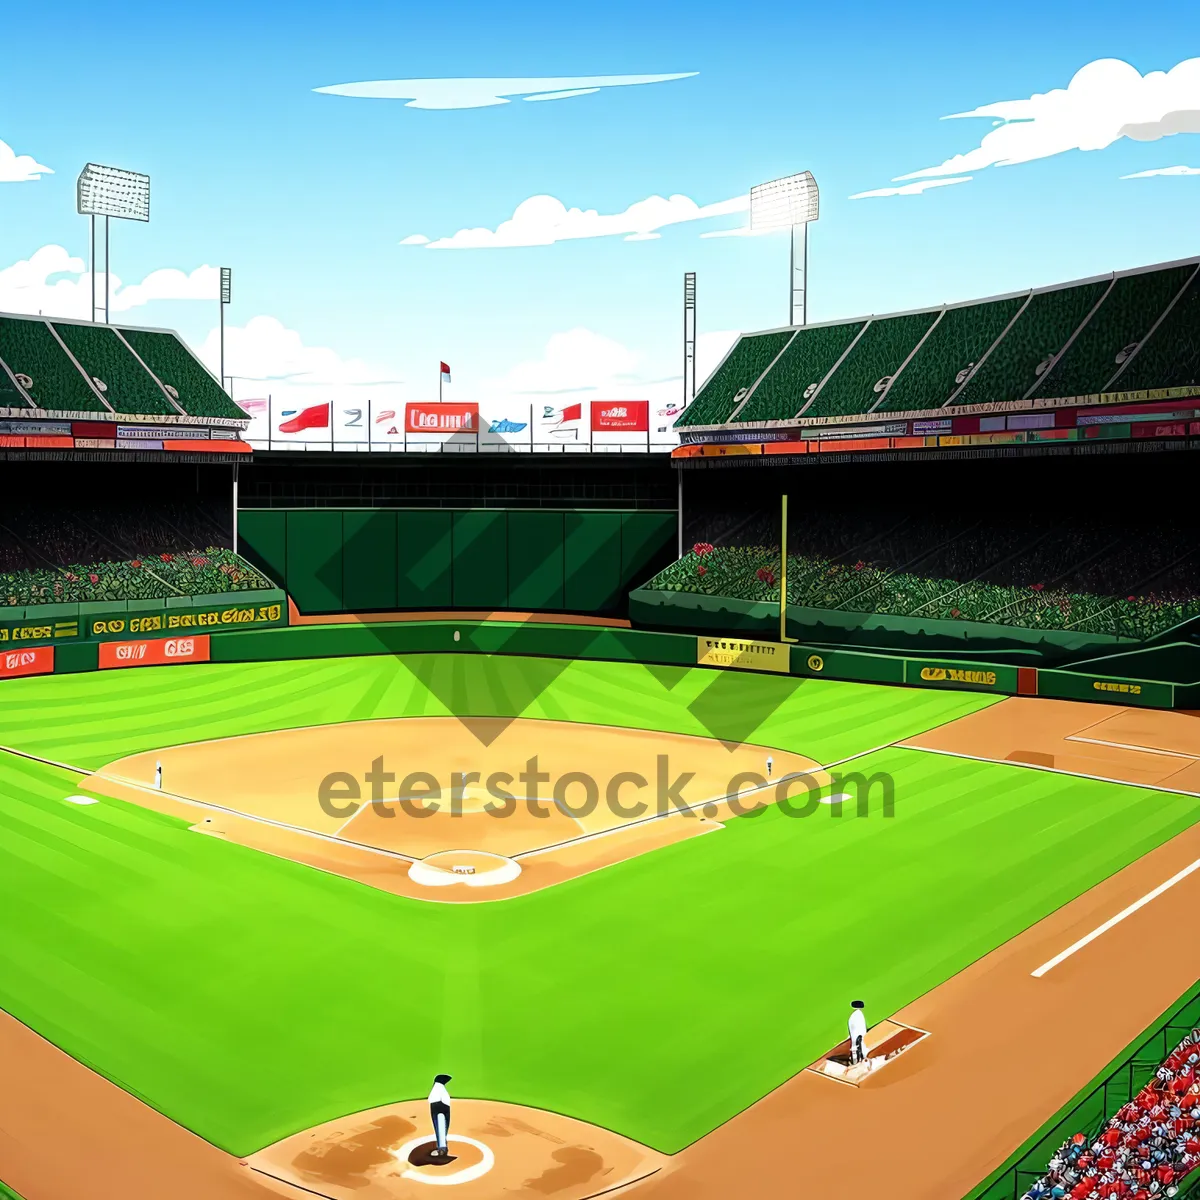 Picture of Sports Stadium with Baseball Equipment on Green Grass